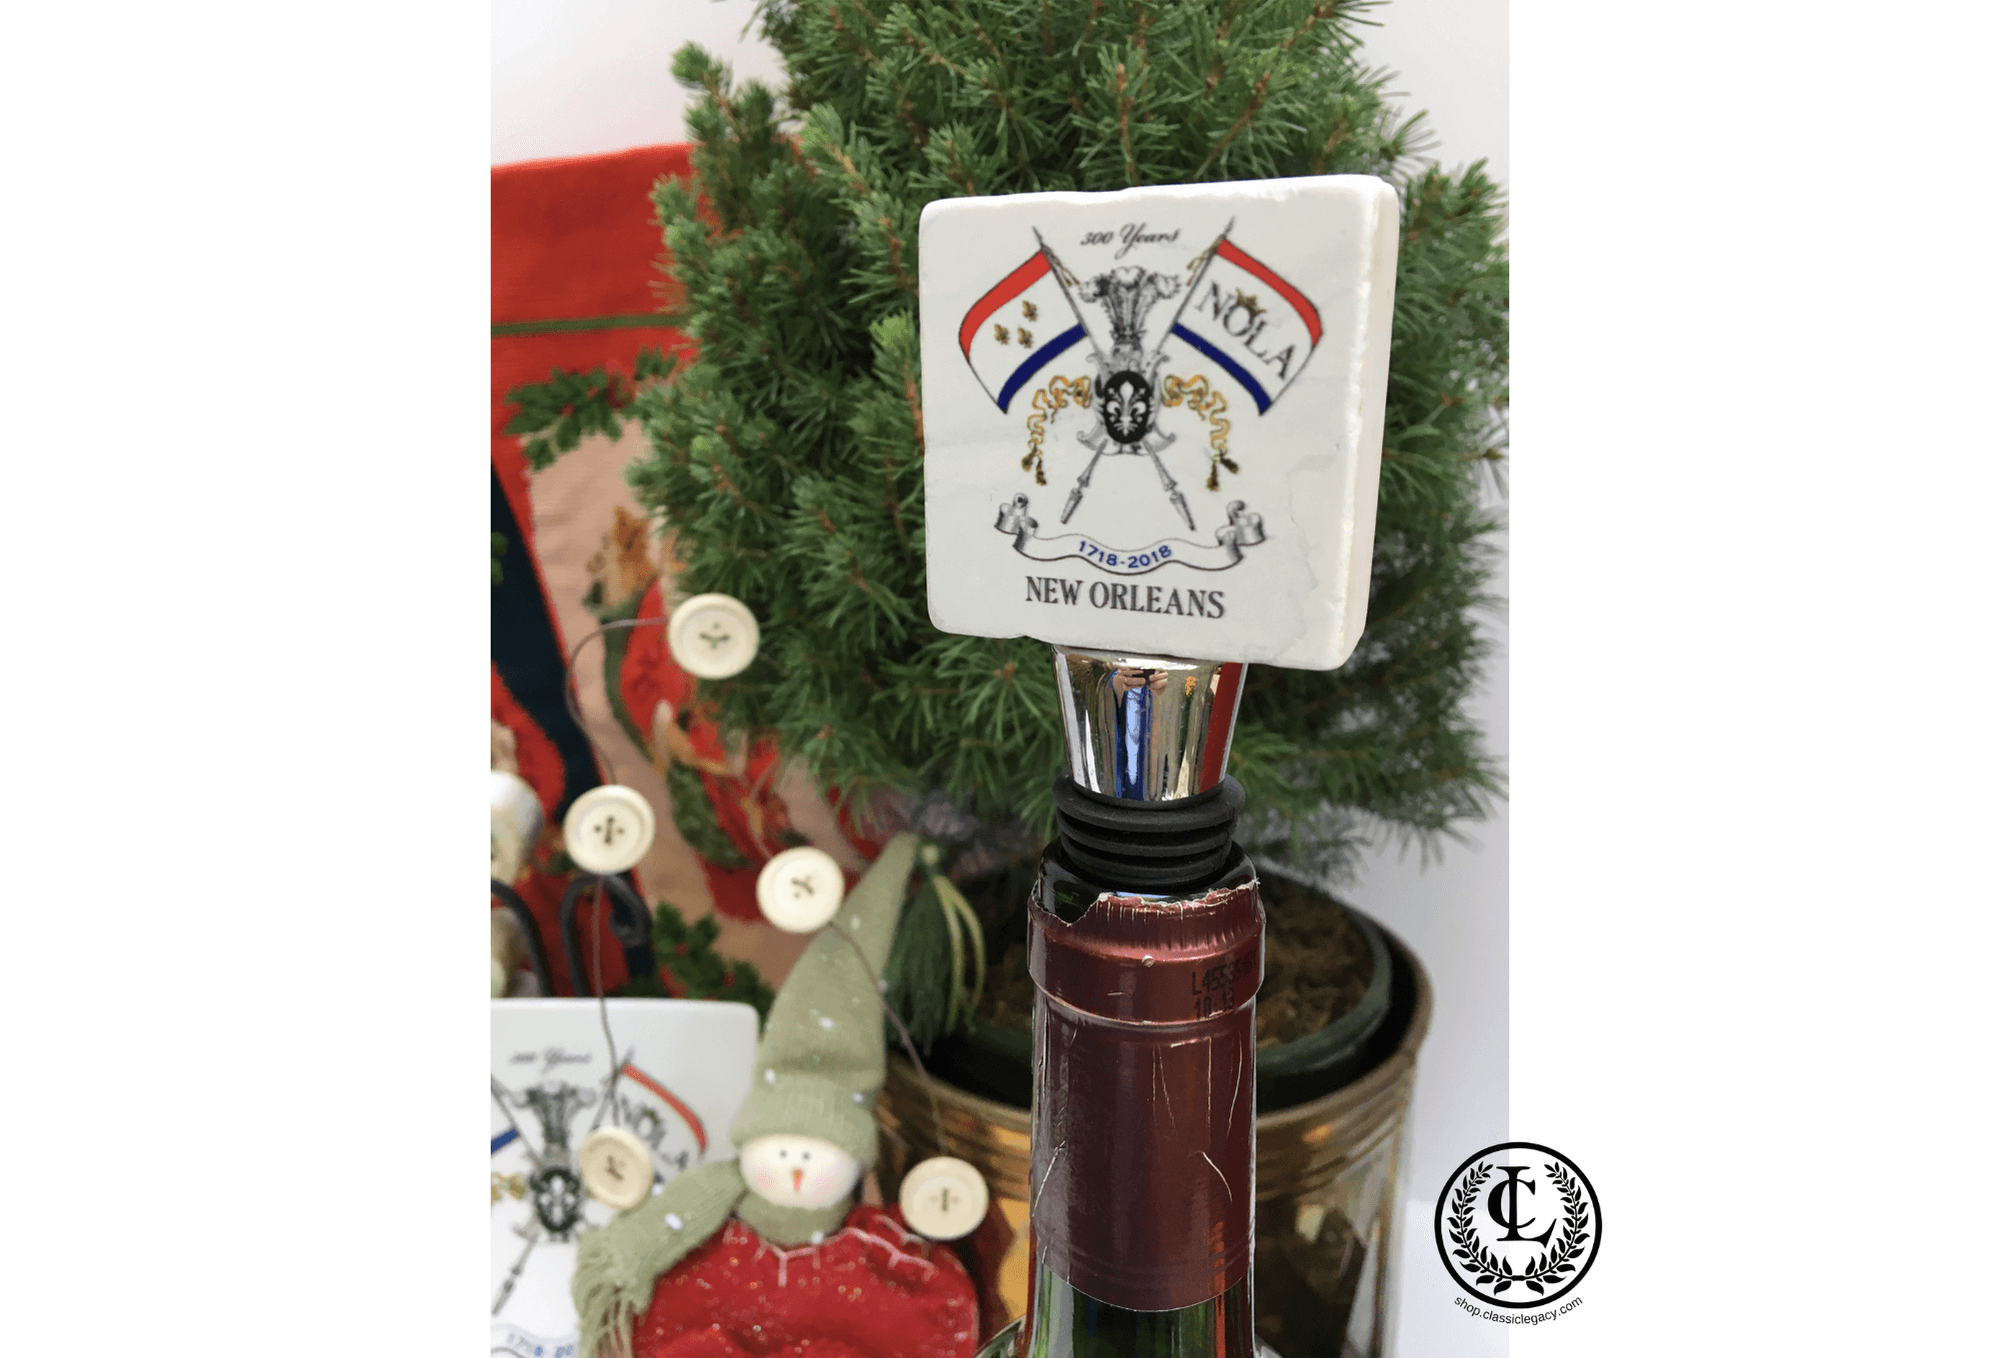 Bottle stopper featuring the art logo of the New Orleans tricentennial.